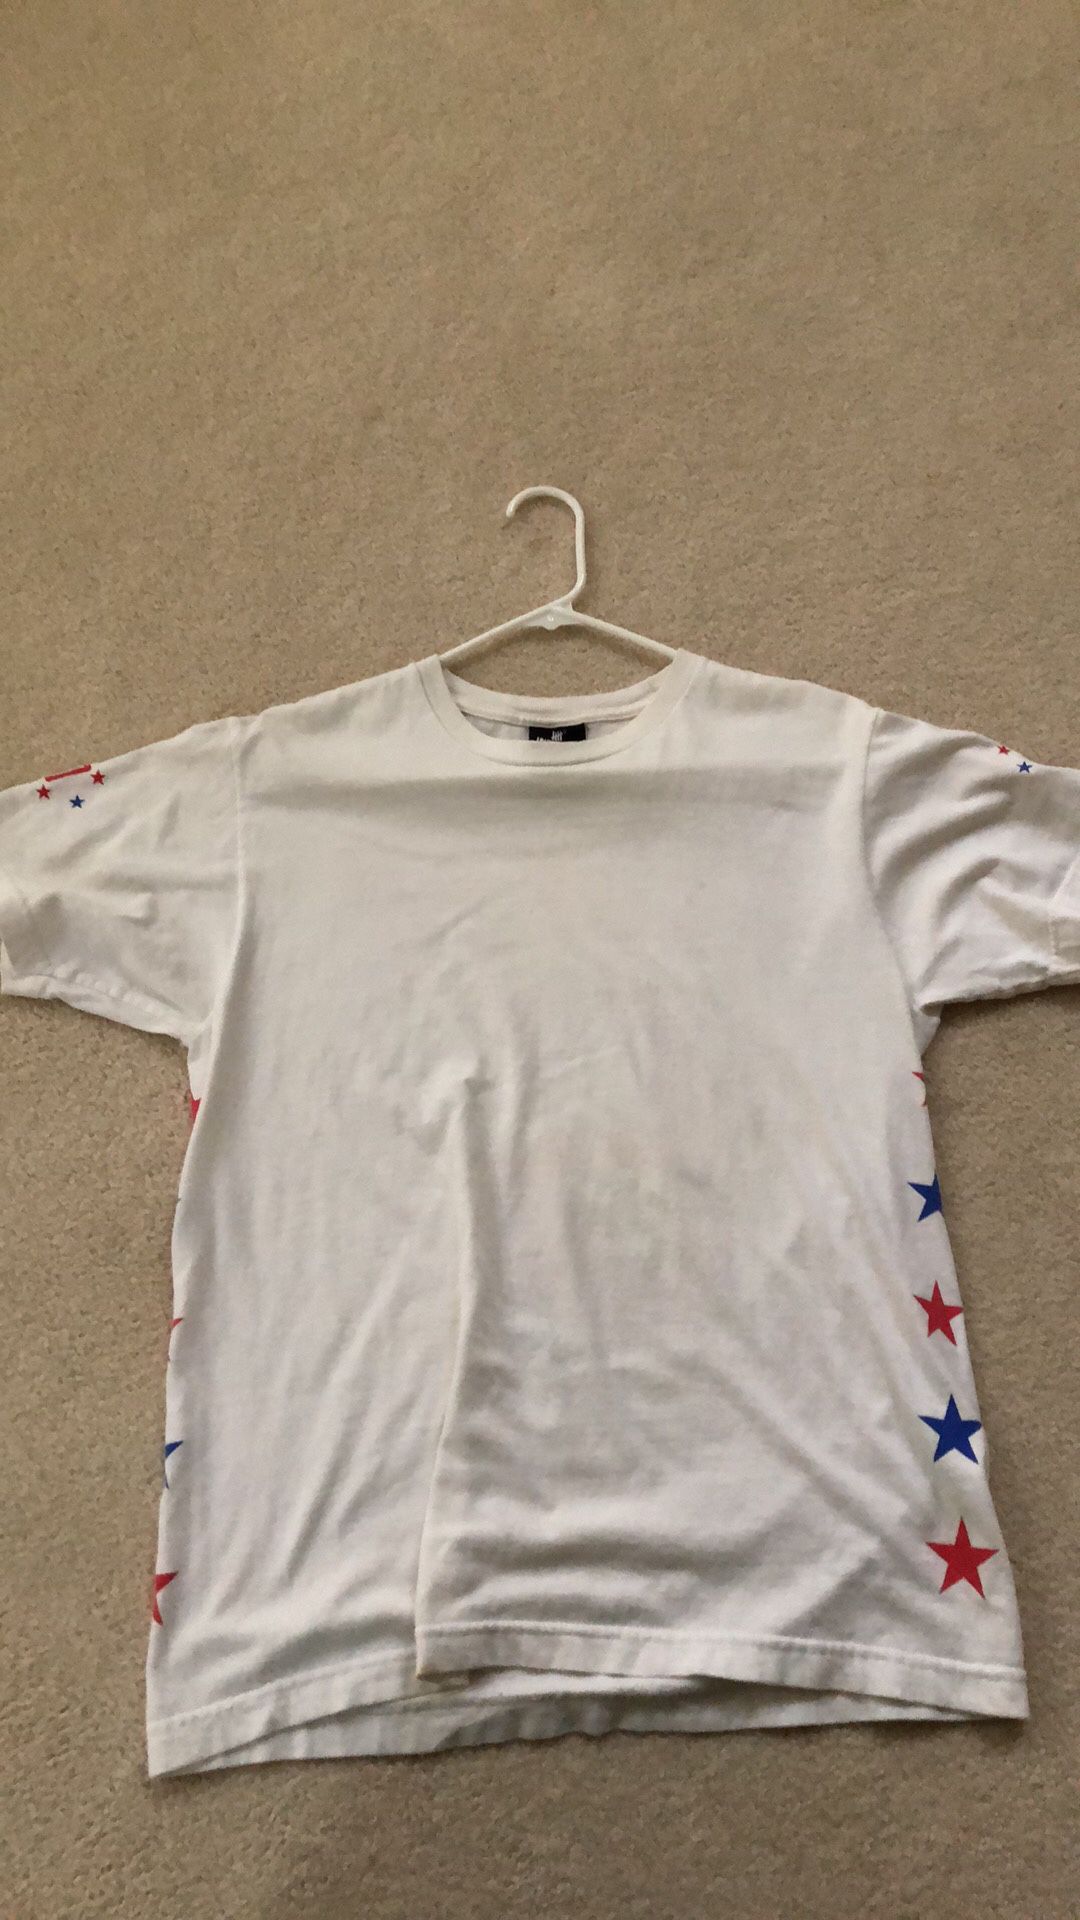 Vintage Undefeated Stars and Stripes T-Shirt